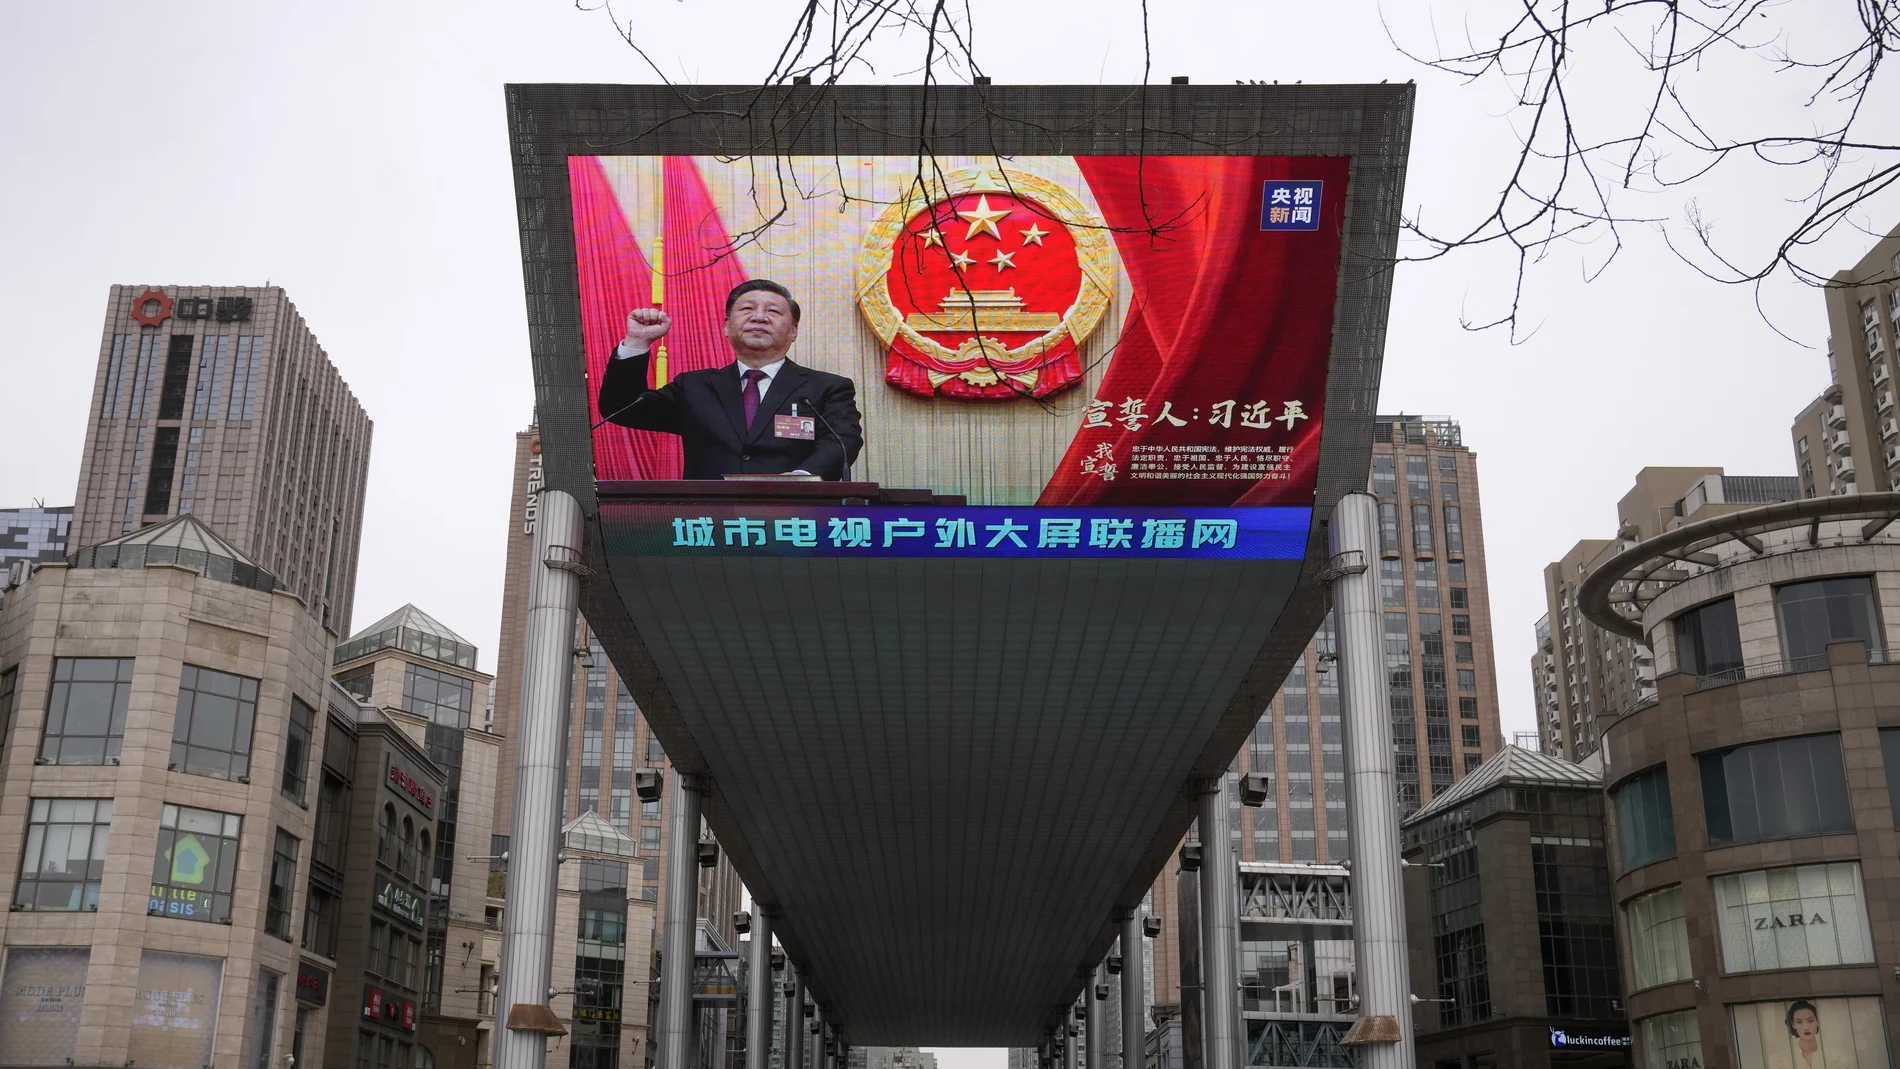 A large video screen shows an image of Chinese President Xi Jinping taking his oath after he is unanimously elected as President during the China's National People's Congress (NPC) head, in Beijing, Saturday, March 11, 2023. China on Saturday named Li Qiang, a close confidant of top leader Xi Jinping, as the country's next premier nominally in charge of the world's second-largest economy now facing some of its worst prospects in years.